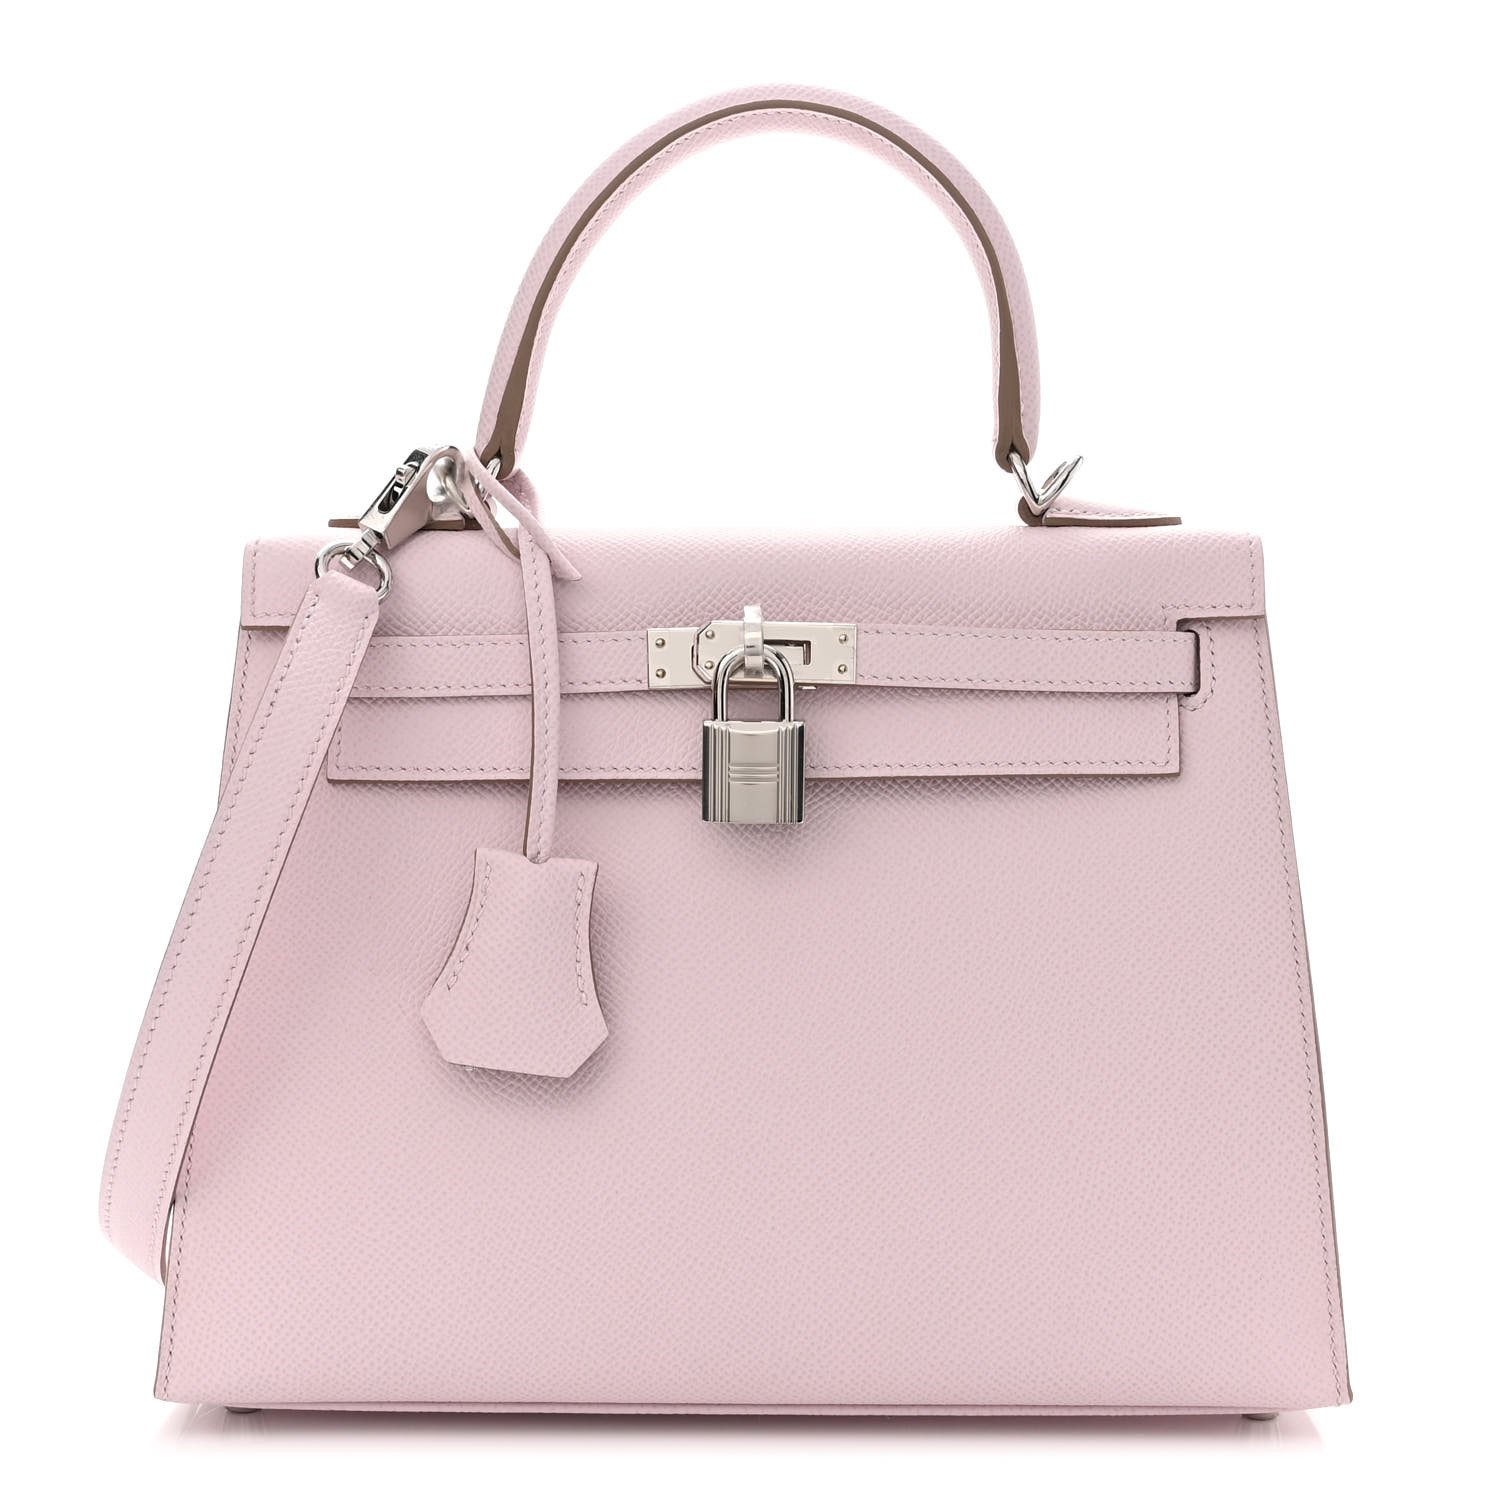 Which Hermès Colors Would Add the Most Value to Your Collection